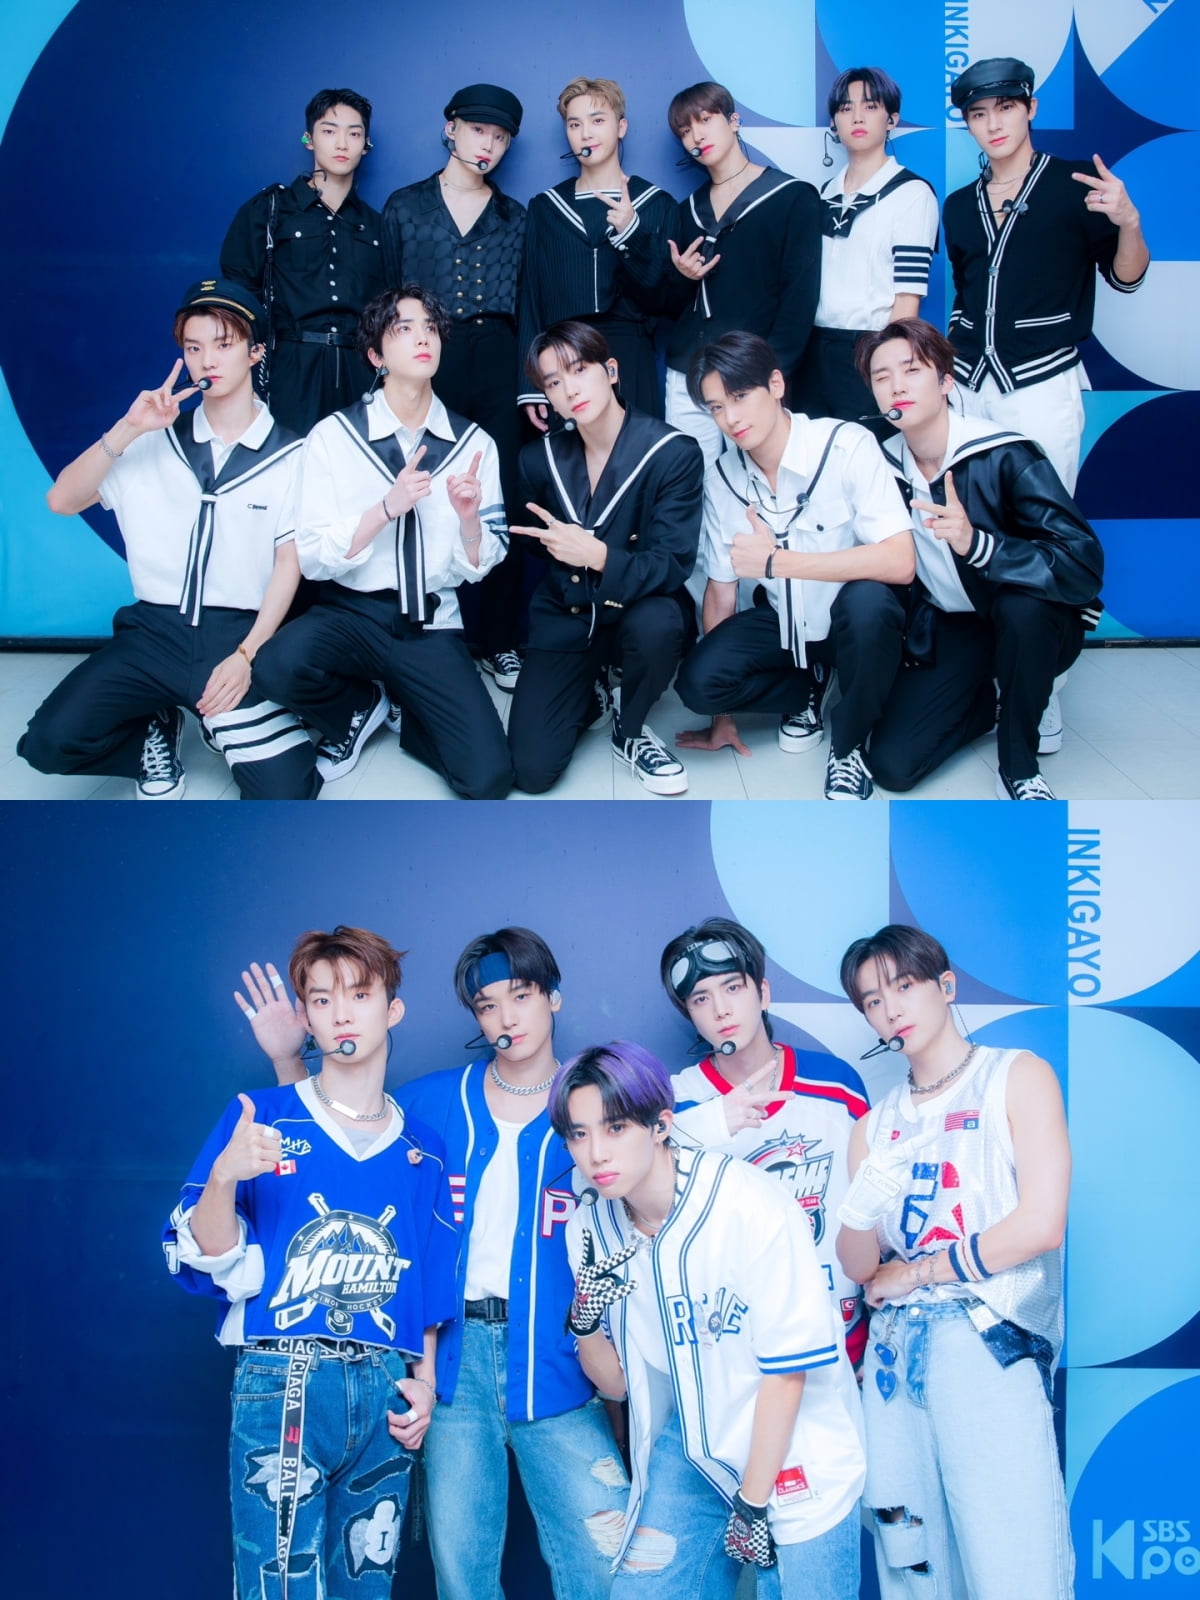 Group The Boyz, a splendid achievement of No. 1 on music, album, global charts and music